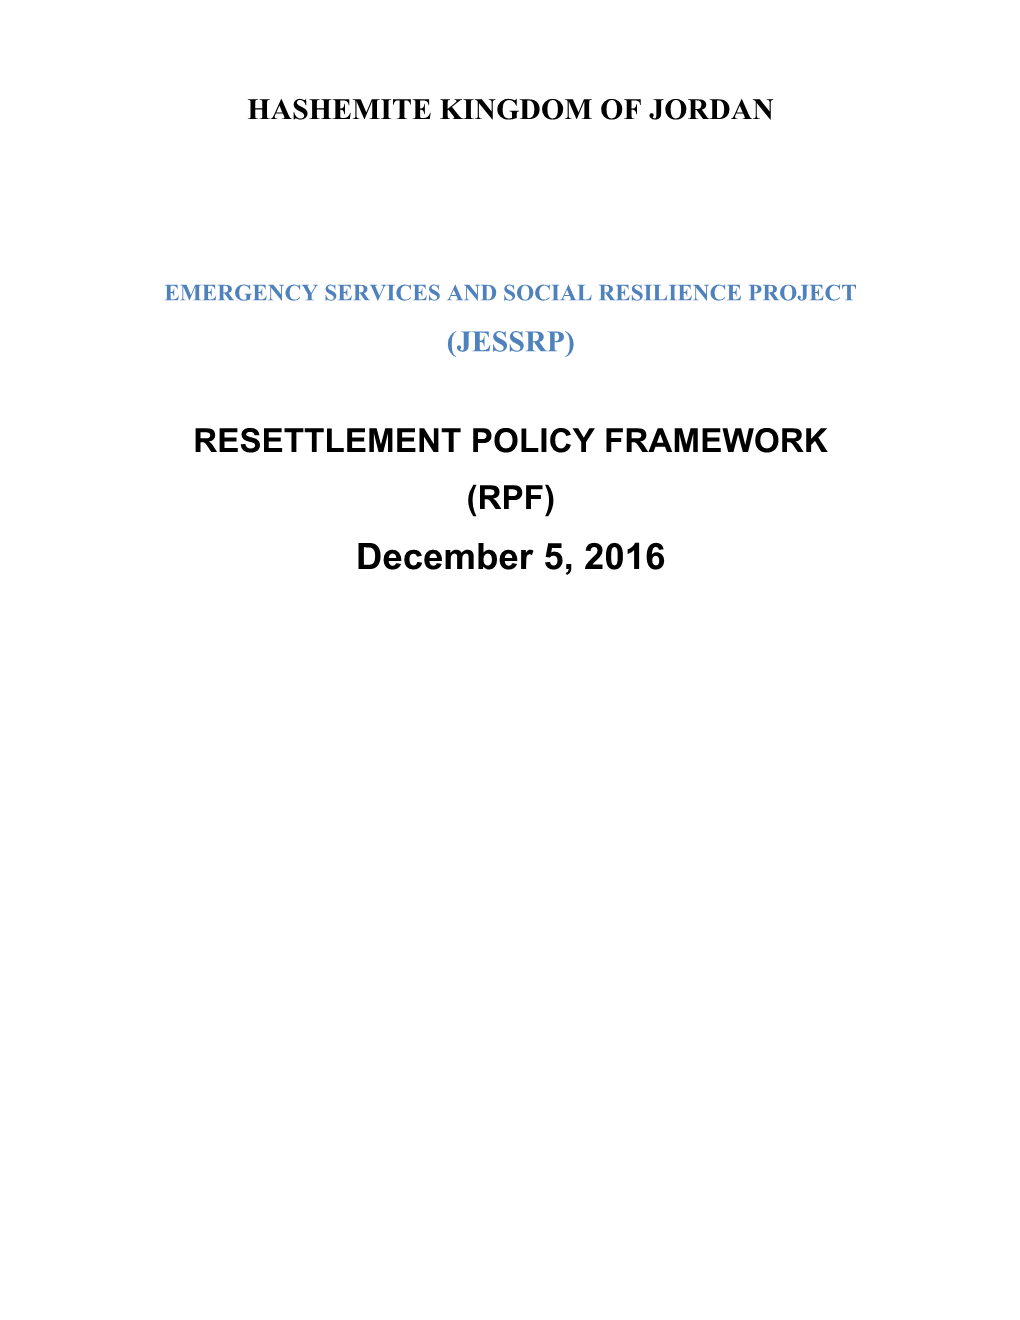 Involuntary Resentment Planning and Processing Outlines